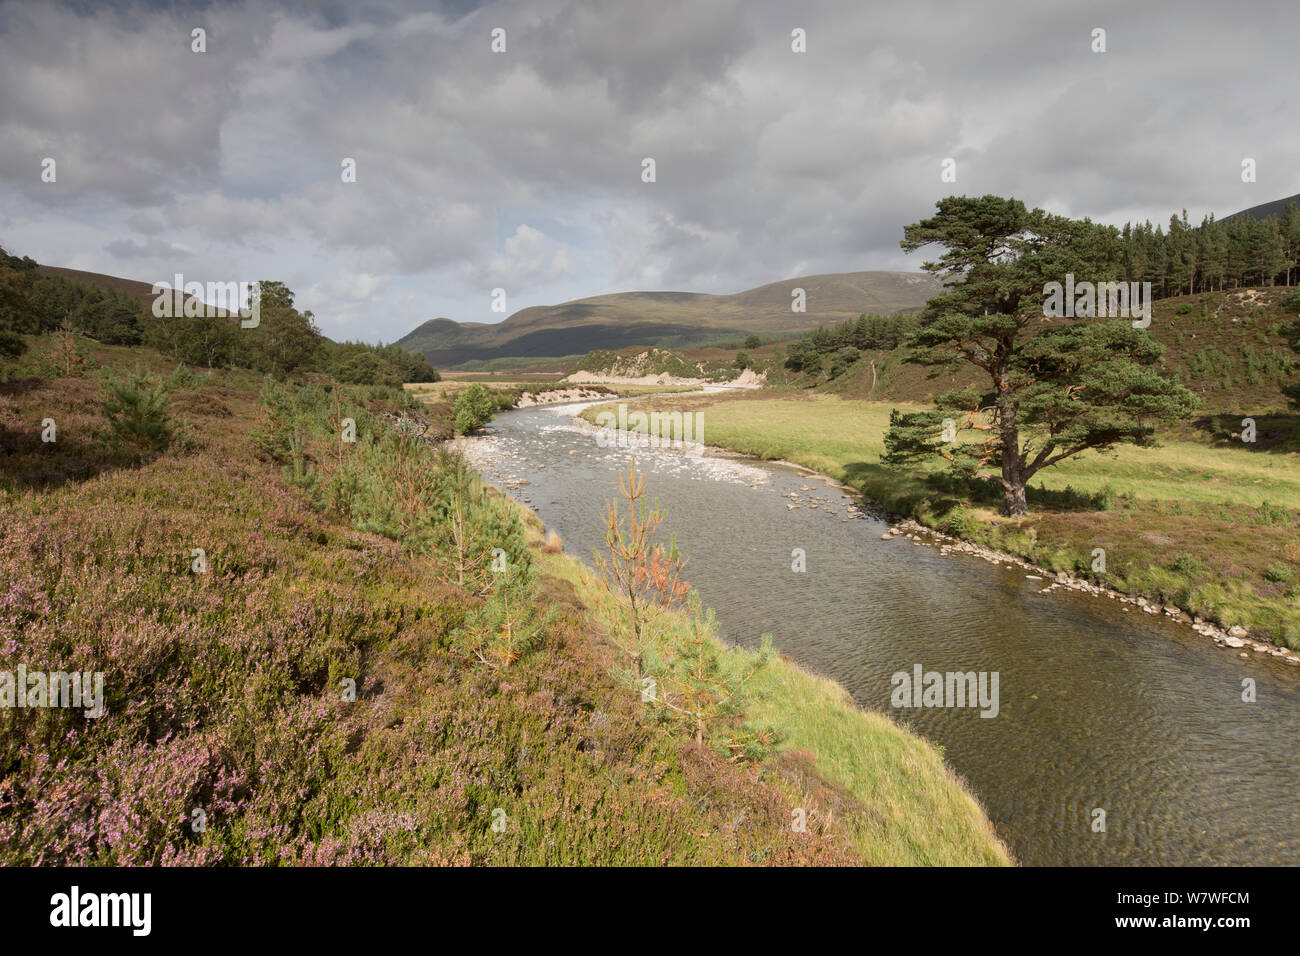 River Feshie, Glenfeshie, Cairngorms National Park, Scotland, August 2013. Stock Photo